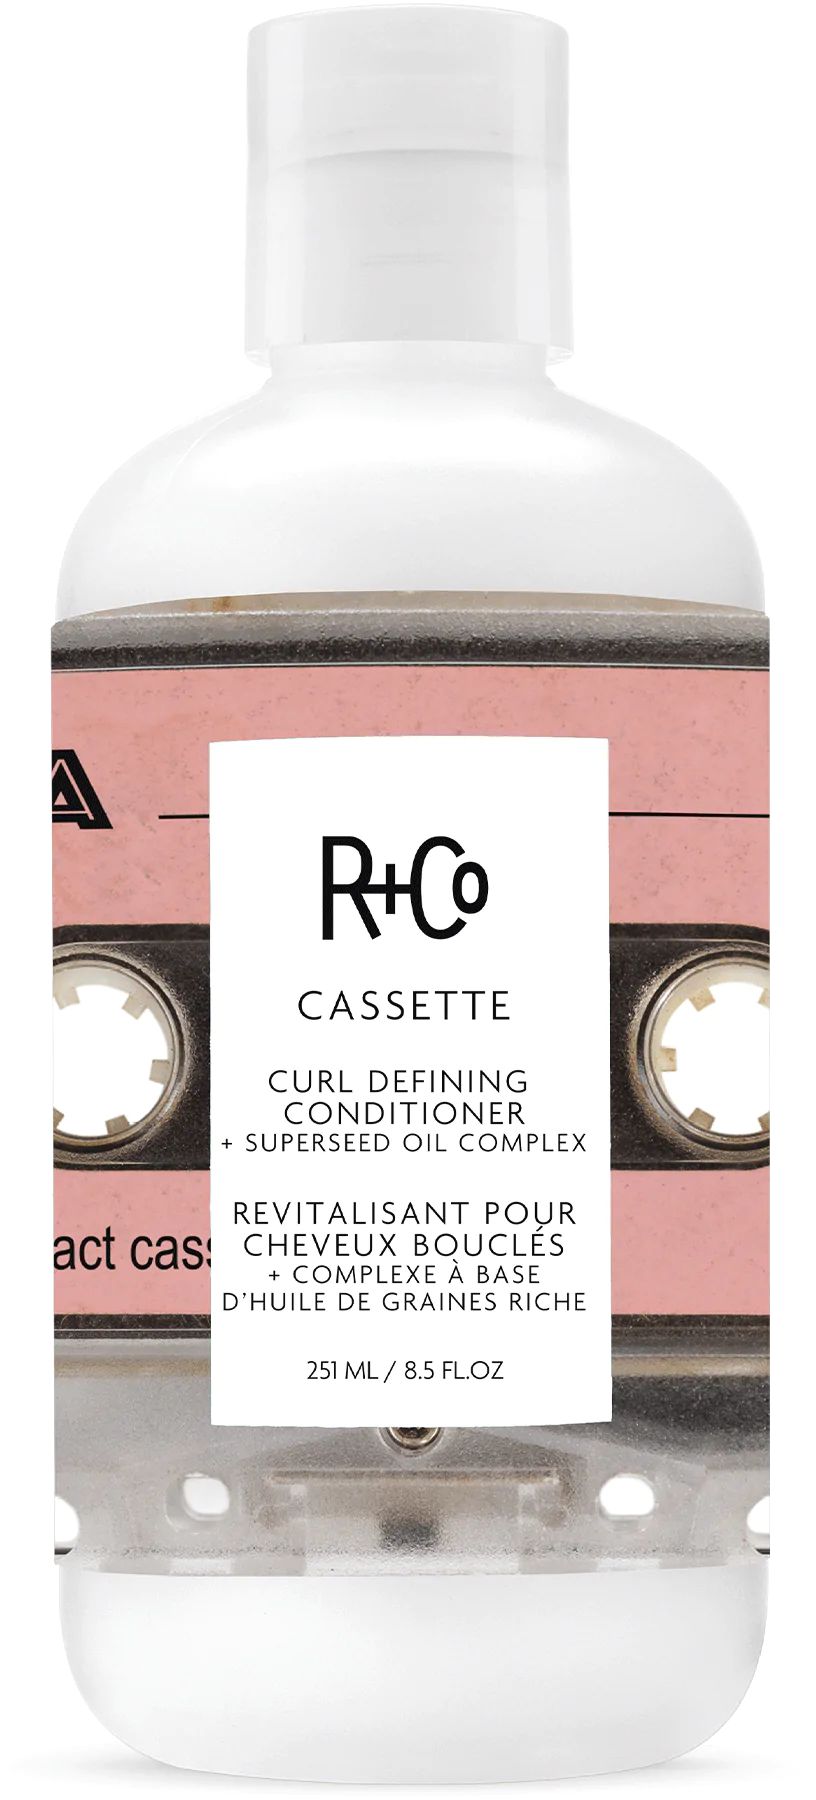 R+Co CASSETTE Curl Defining Conditioner + Superseed Oil Complex - 8.5 OZ | R+Co